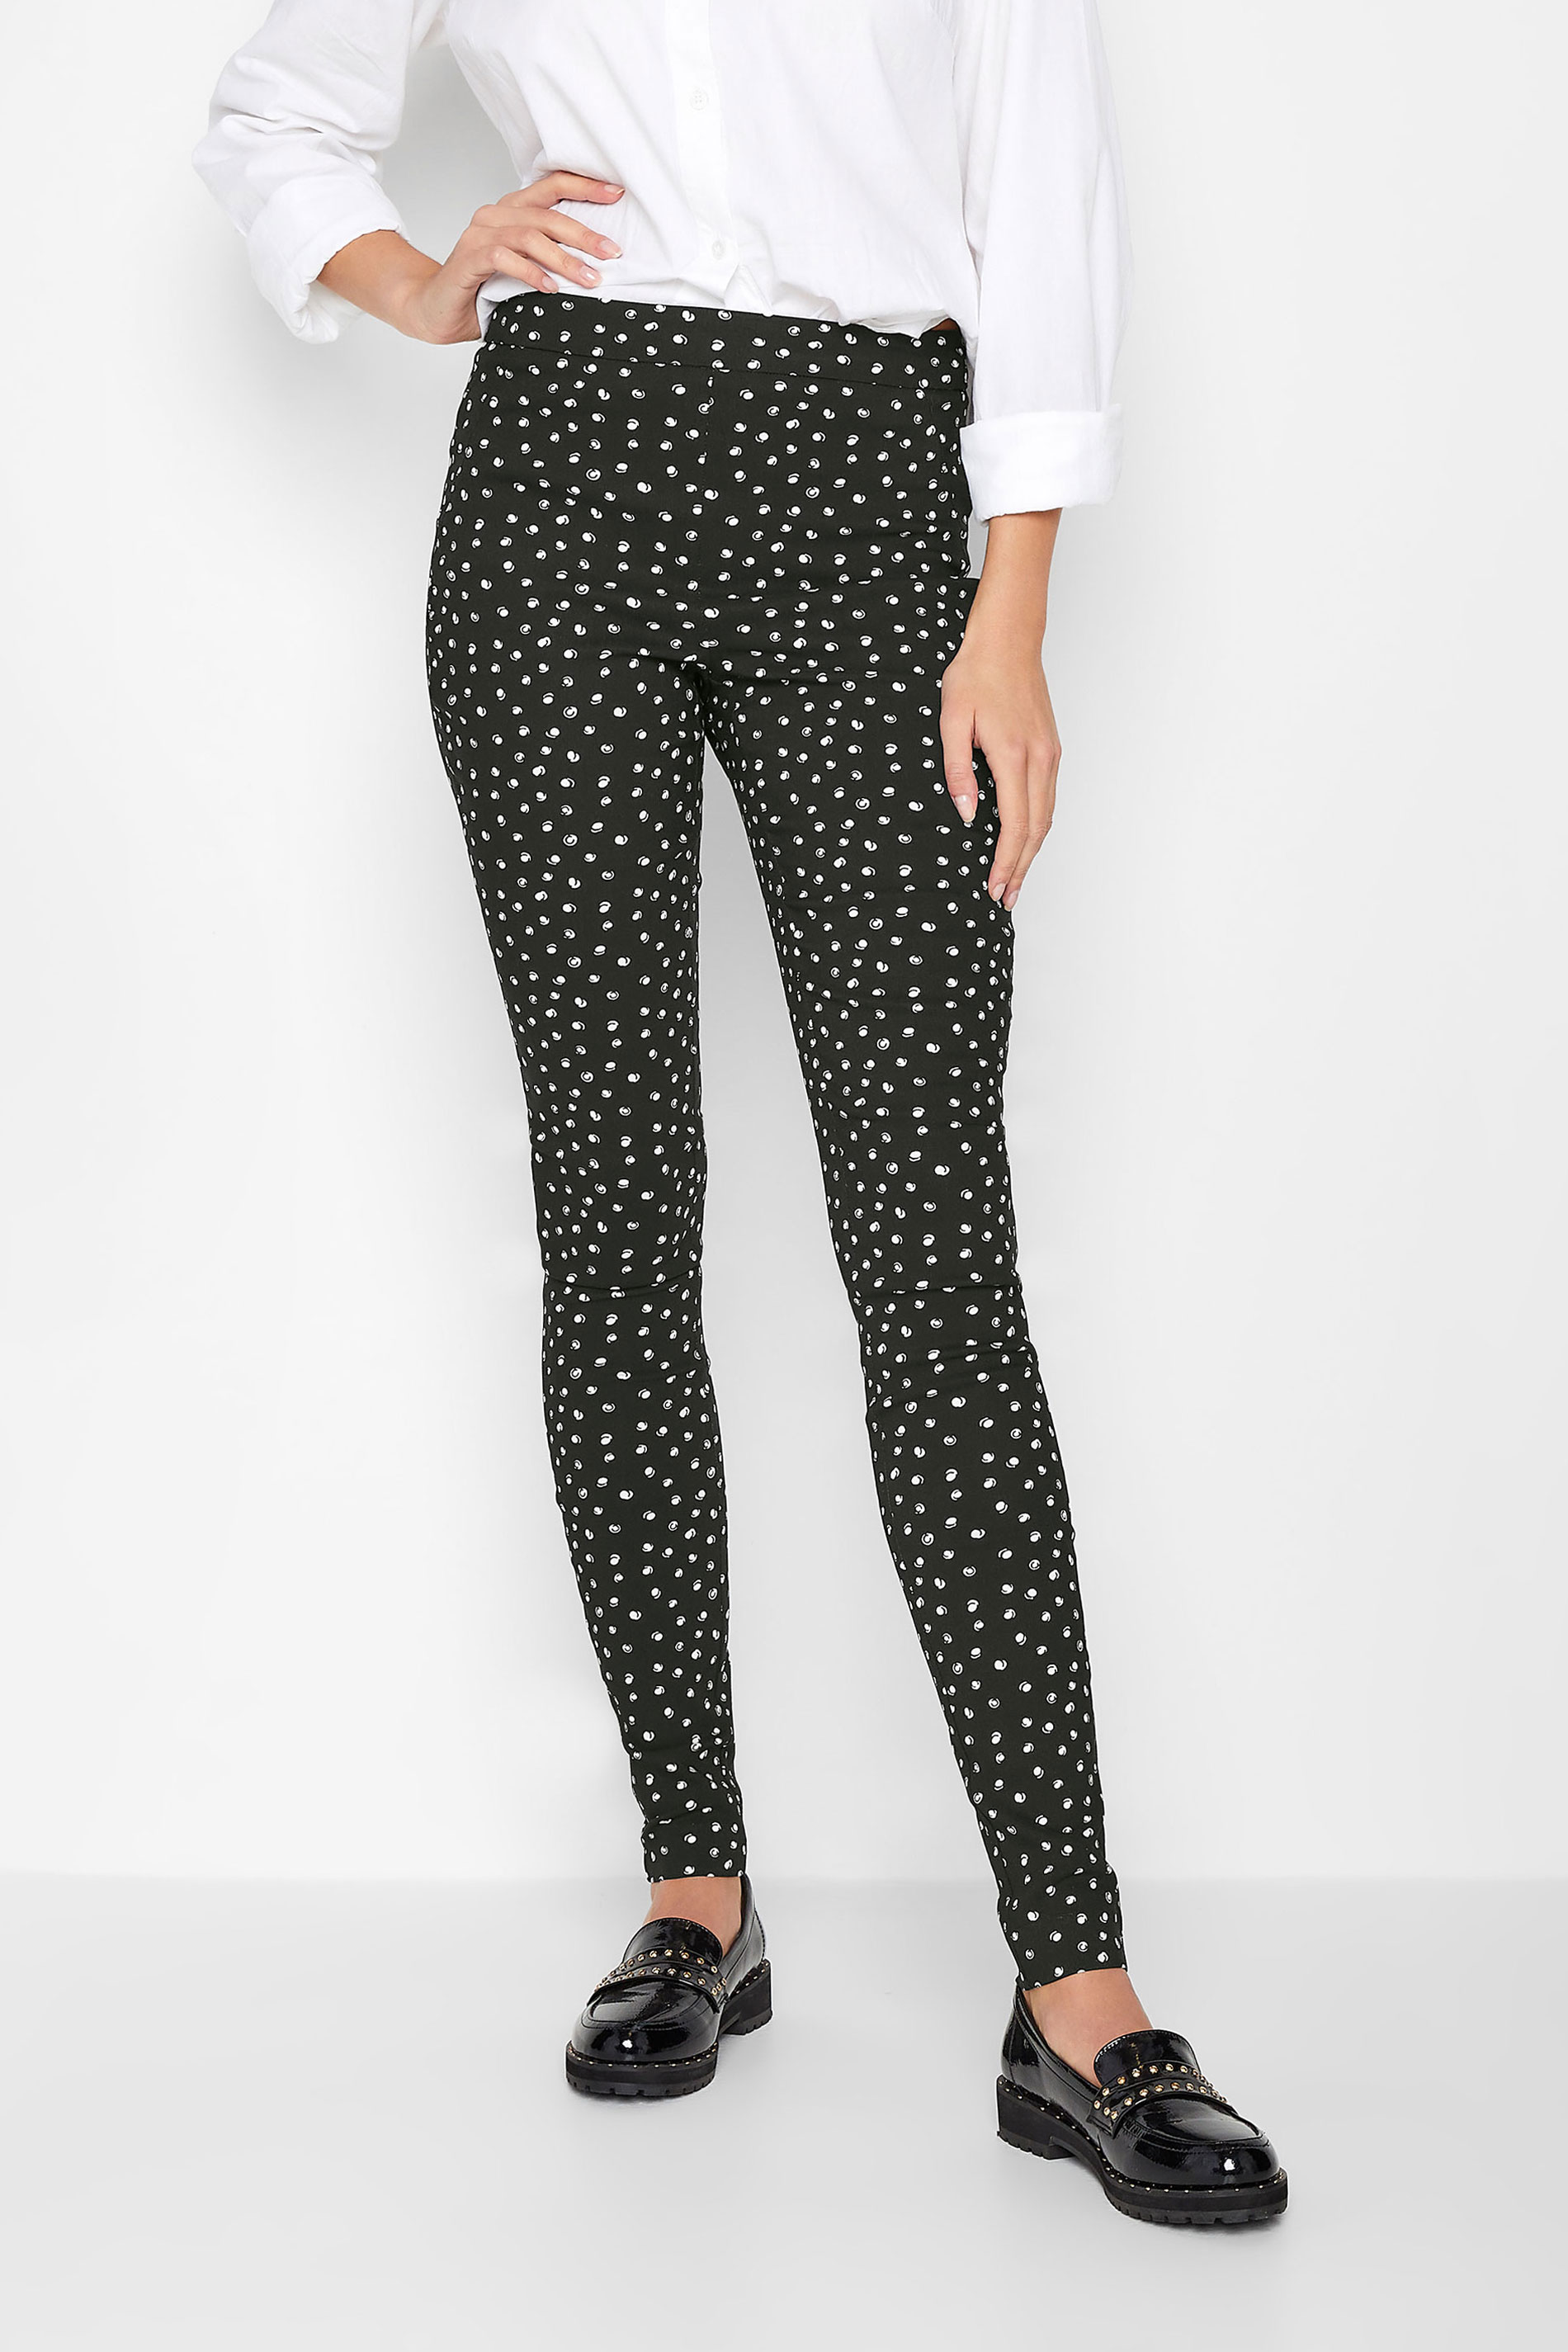 Soft Surroundings Polka Dots Solid Black Casual Pants Size 8 - 84% off